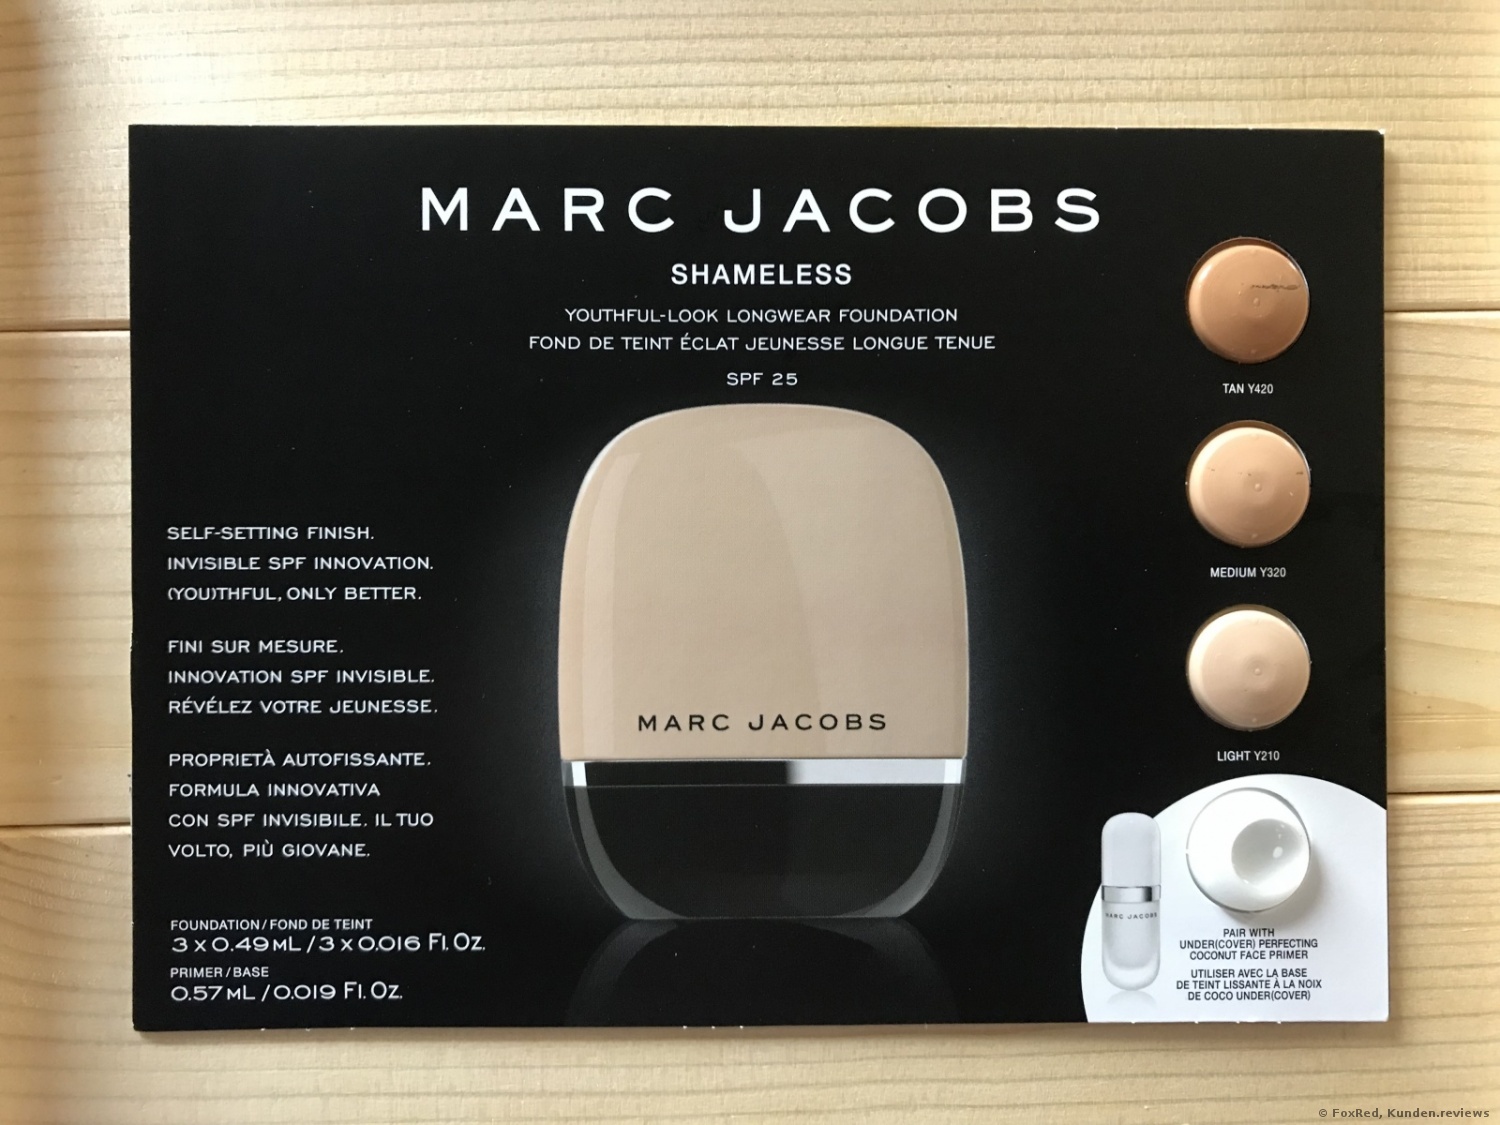 MARC JACOBS Shameless Youthful-Look 24-Hour Foundation